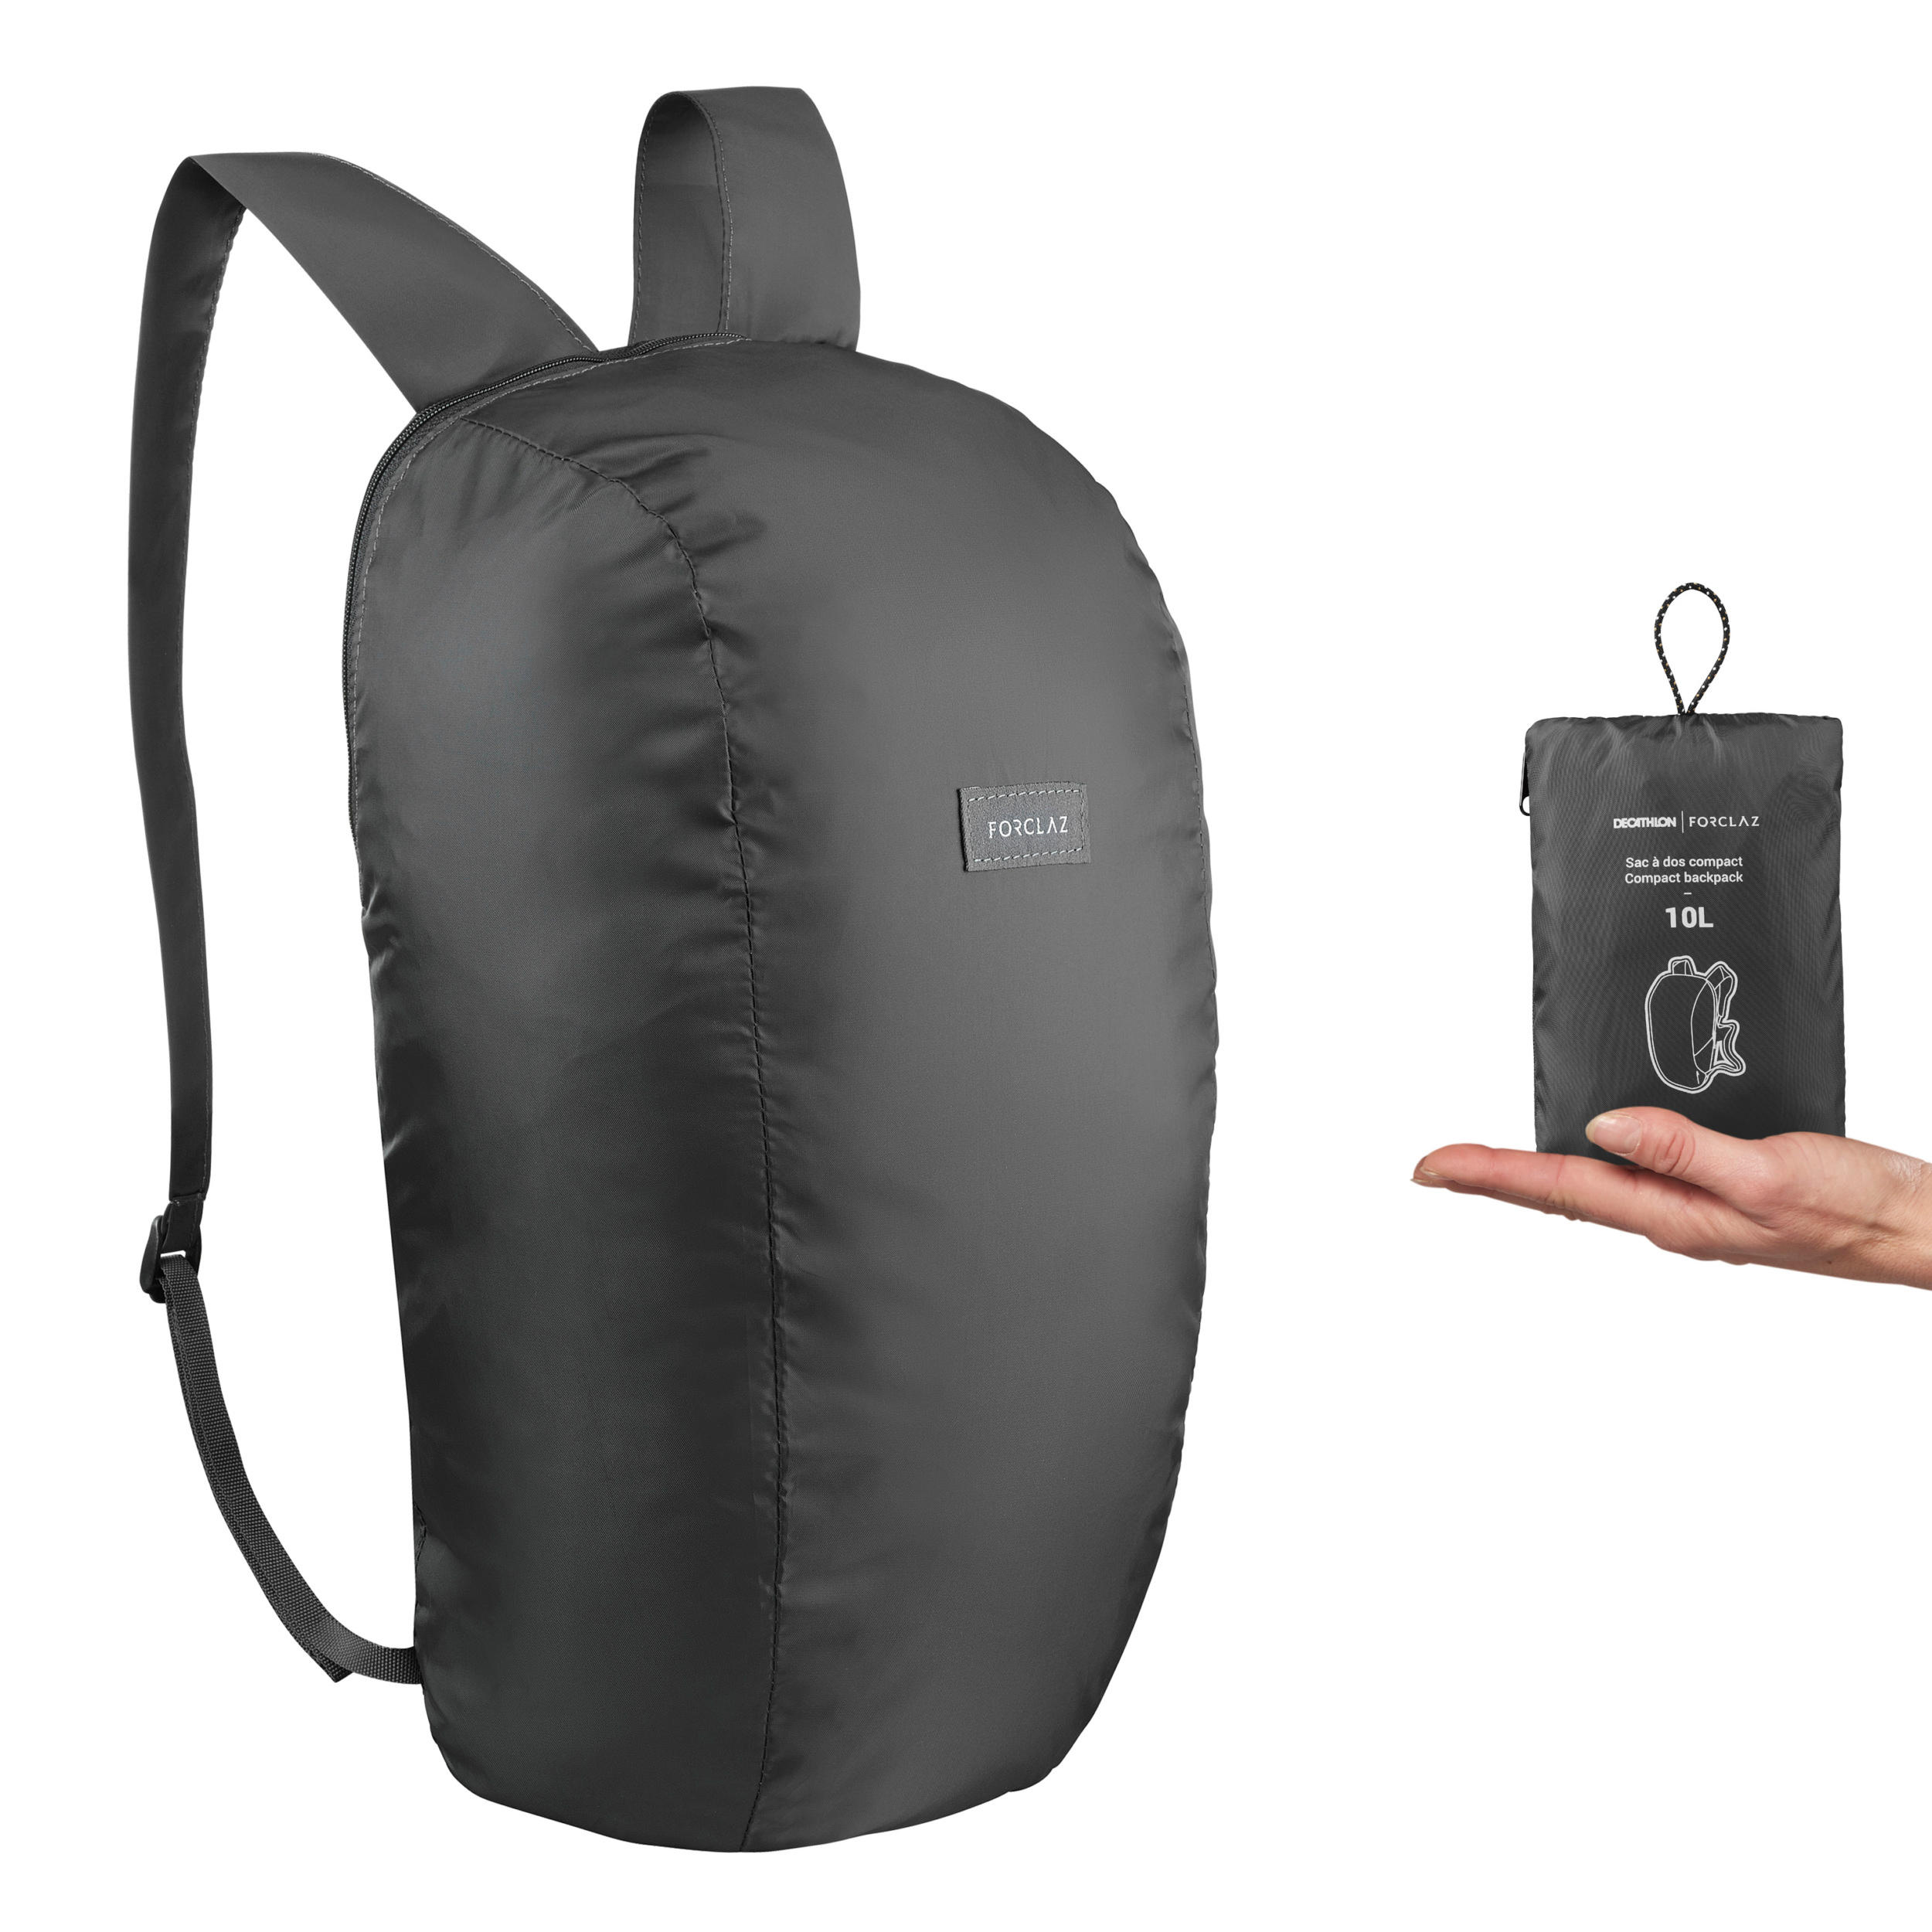 Sac à dos isotherme 10L - NH Ice compact 100 QUECHUA